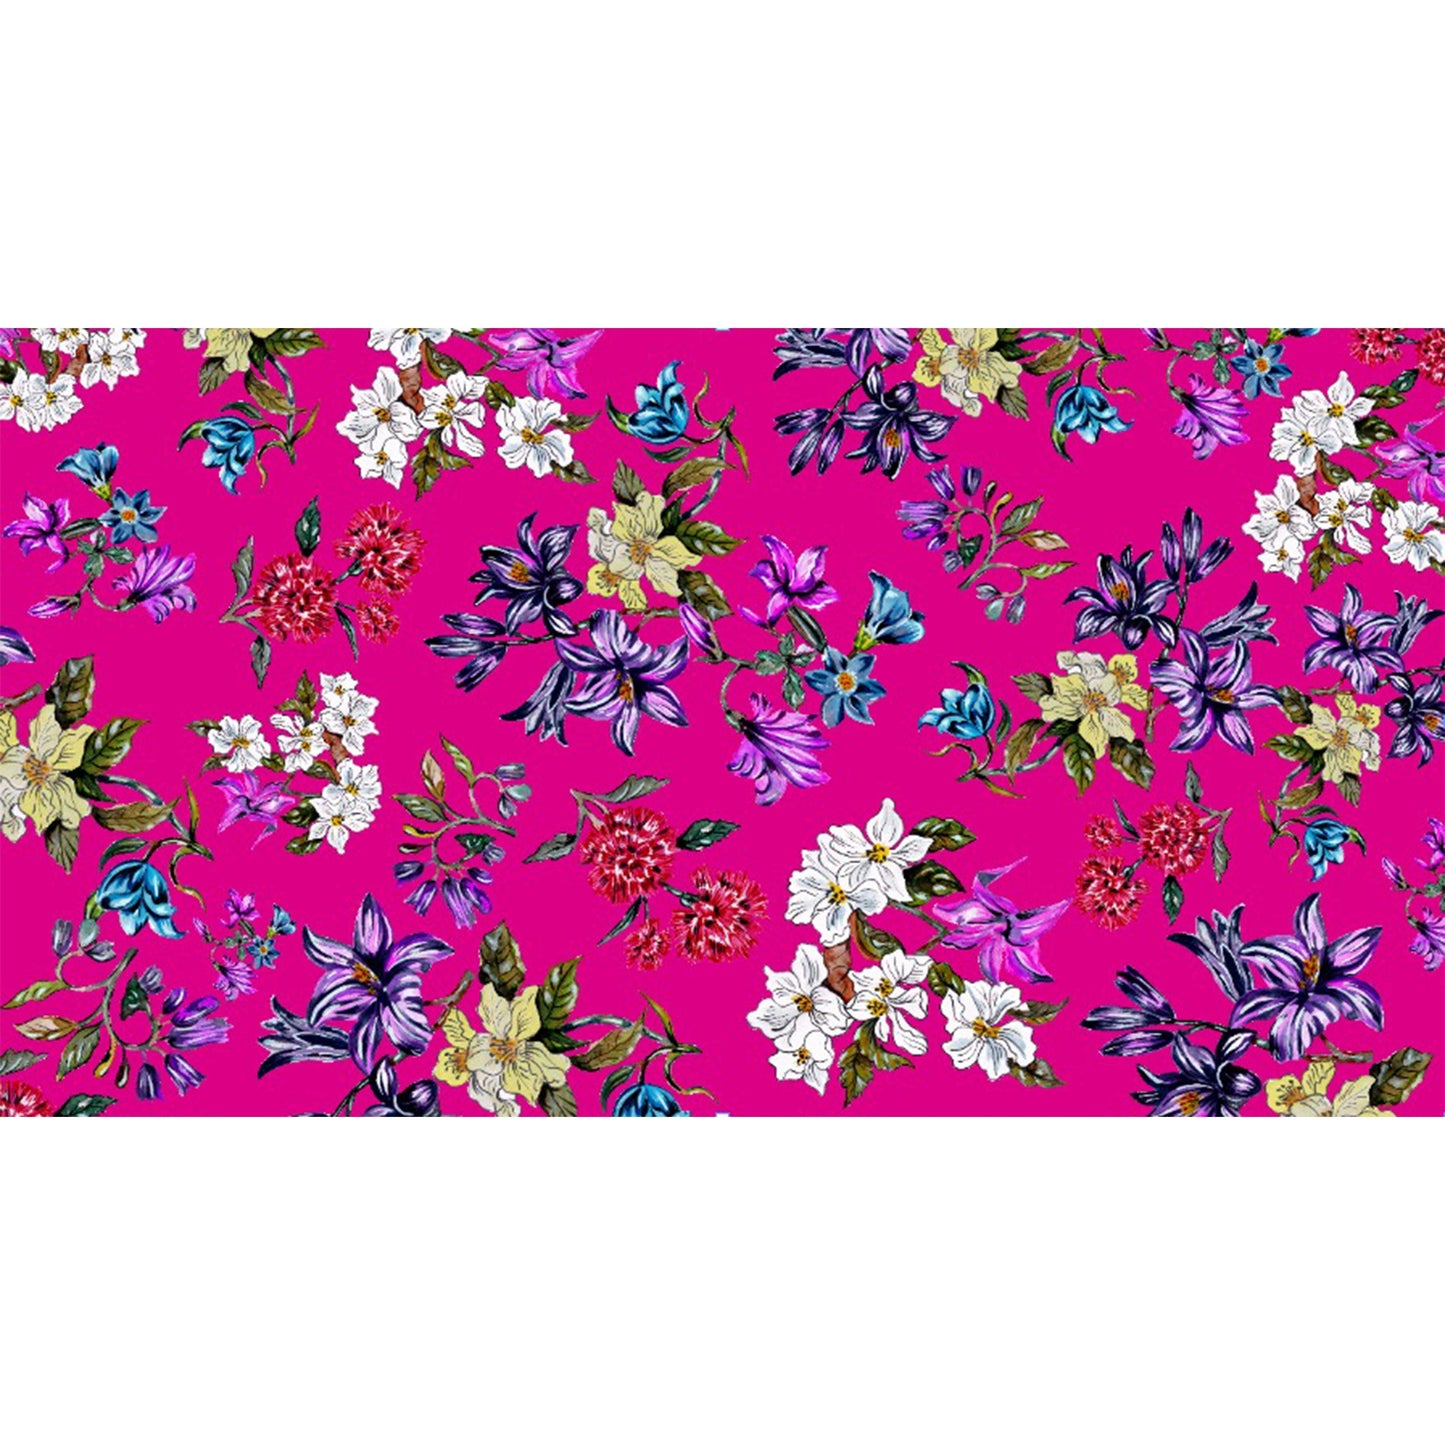 ''FLORAL'' CASHMERE SCARF - PINK